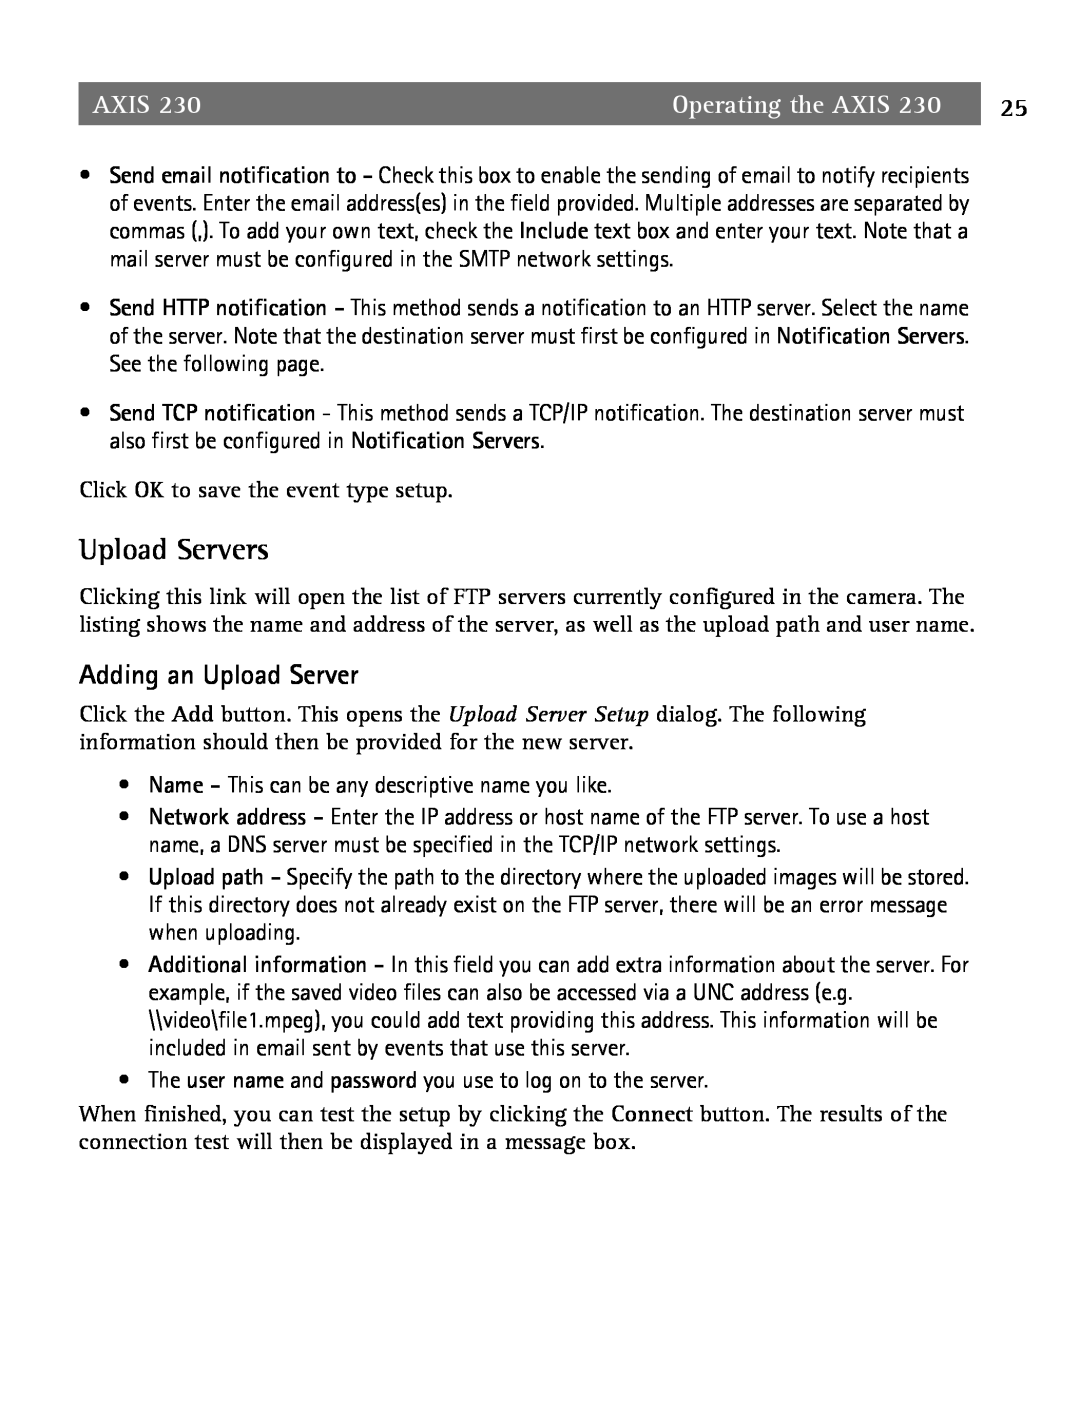 Axis Communications 2 user manual Upload Servers, Adding an Upload Server, Axis, Operating the AXIS 